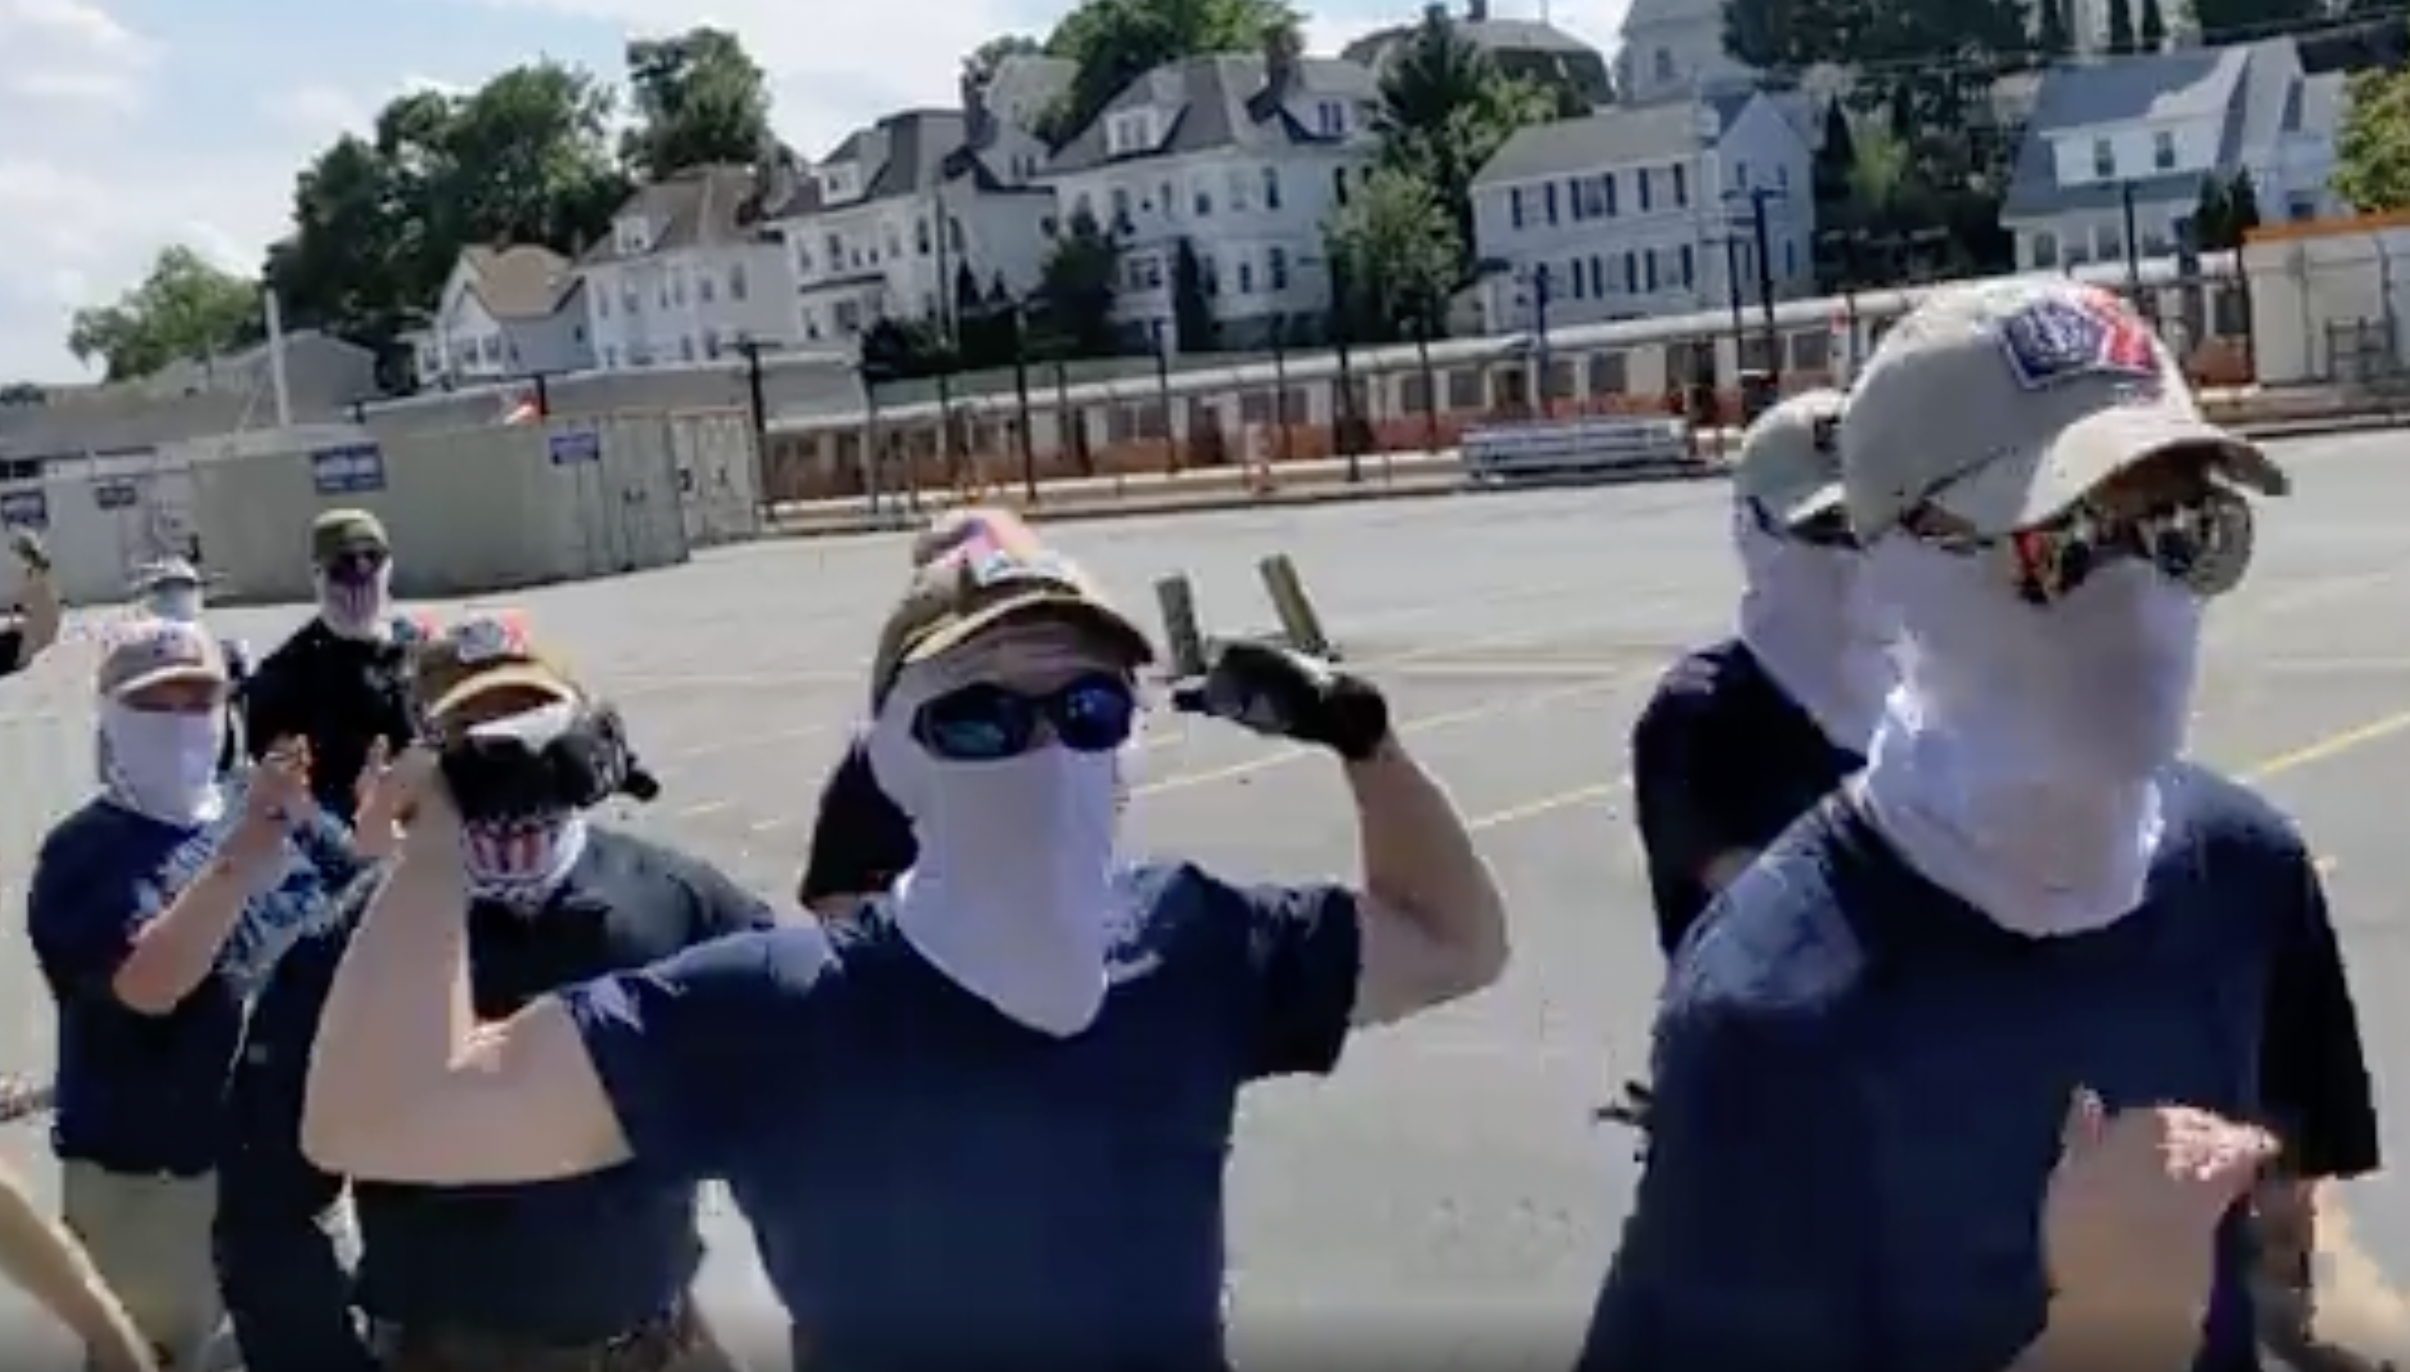 Who are The Patriot Front? White nationalist group marched in